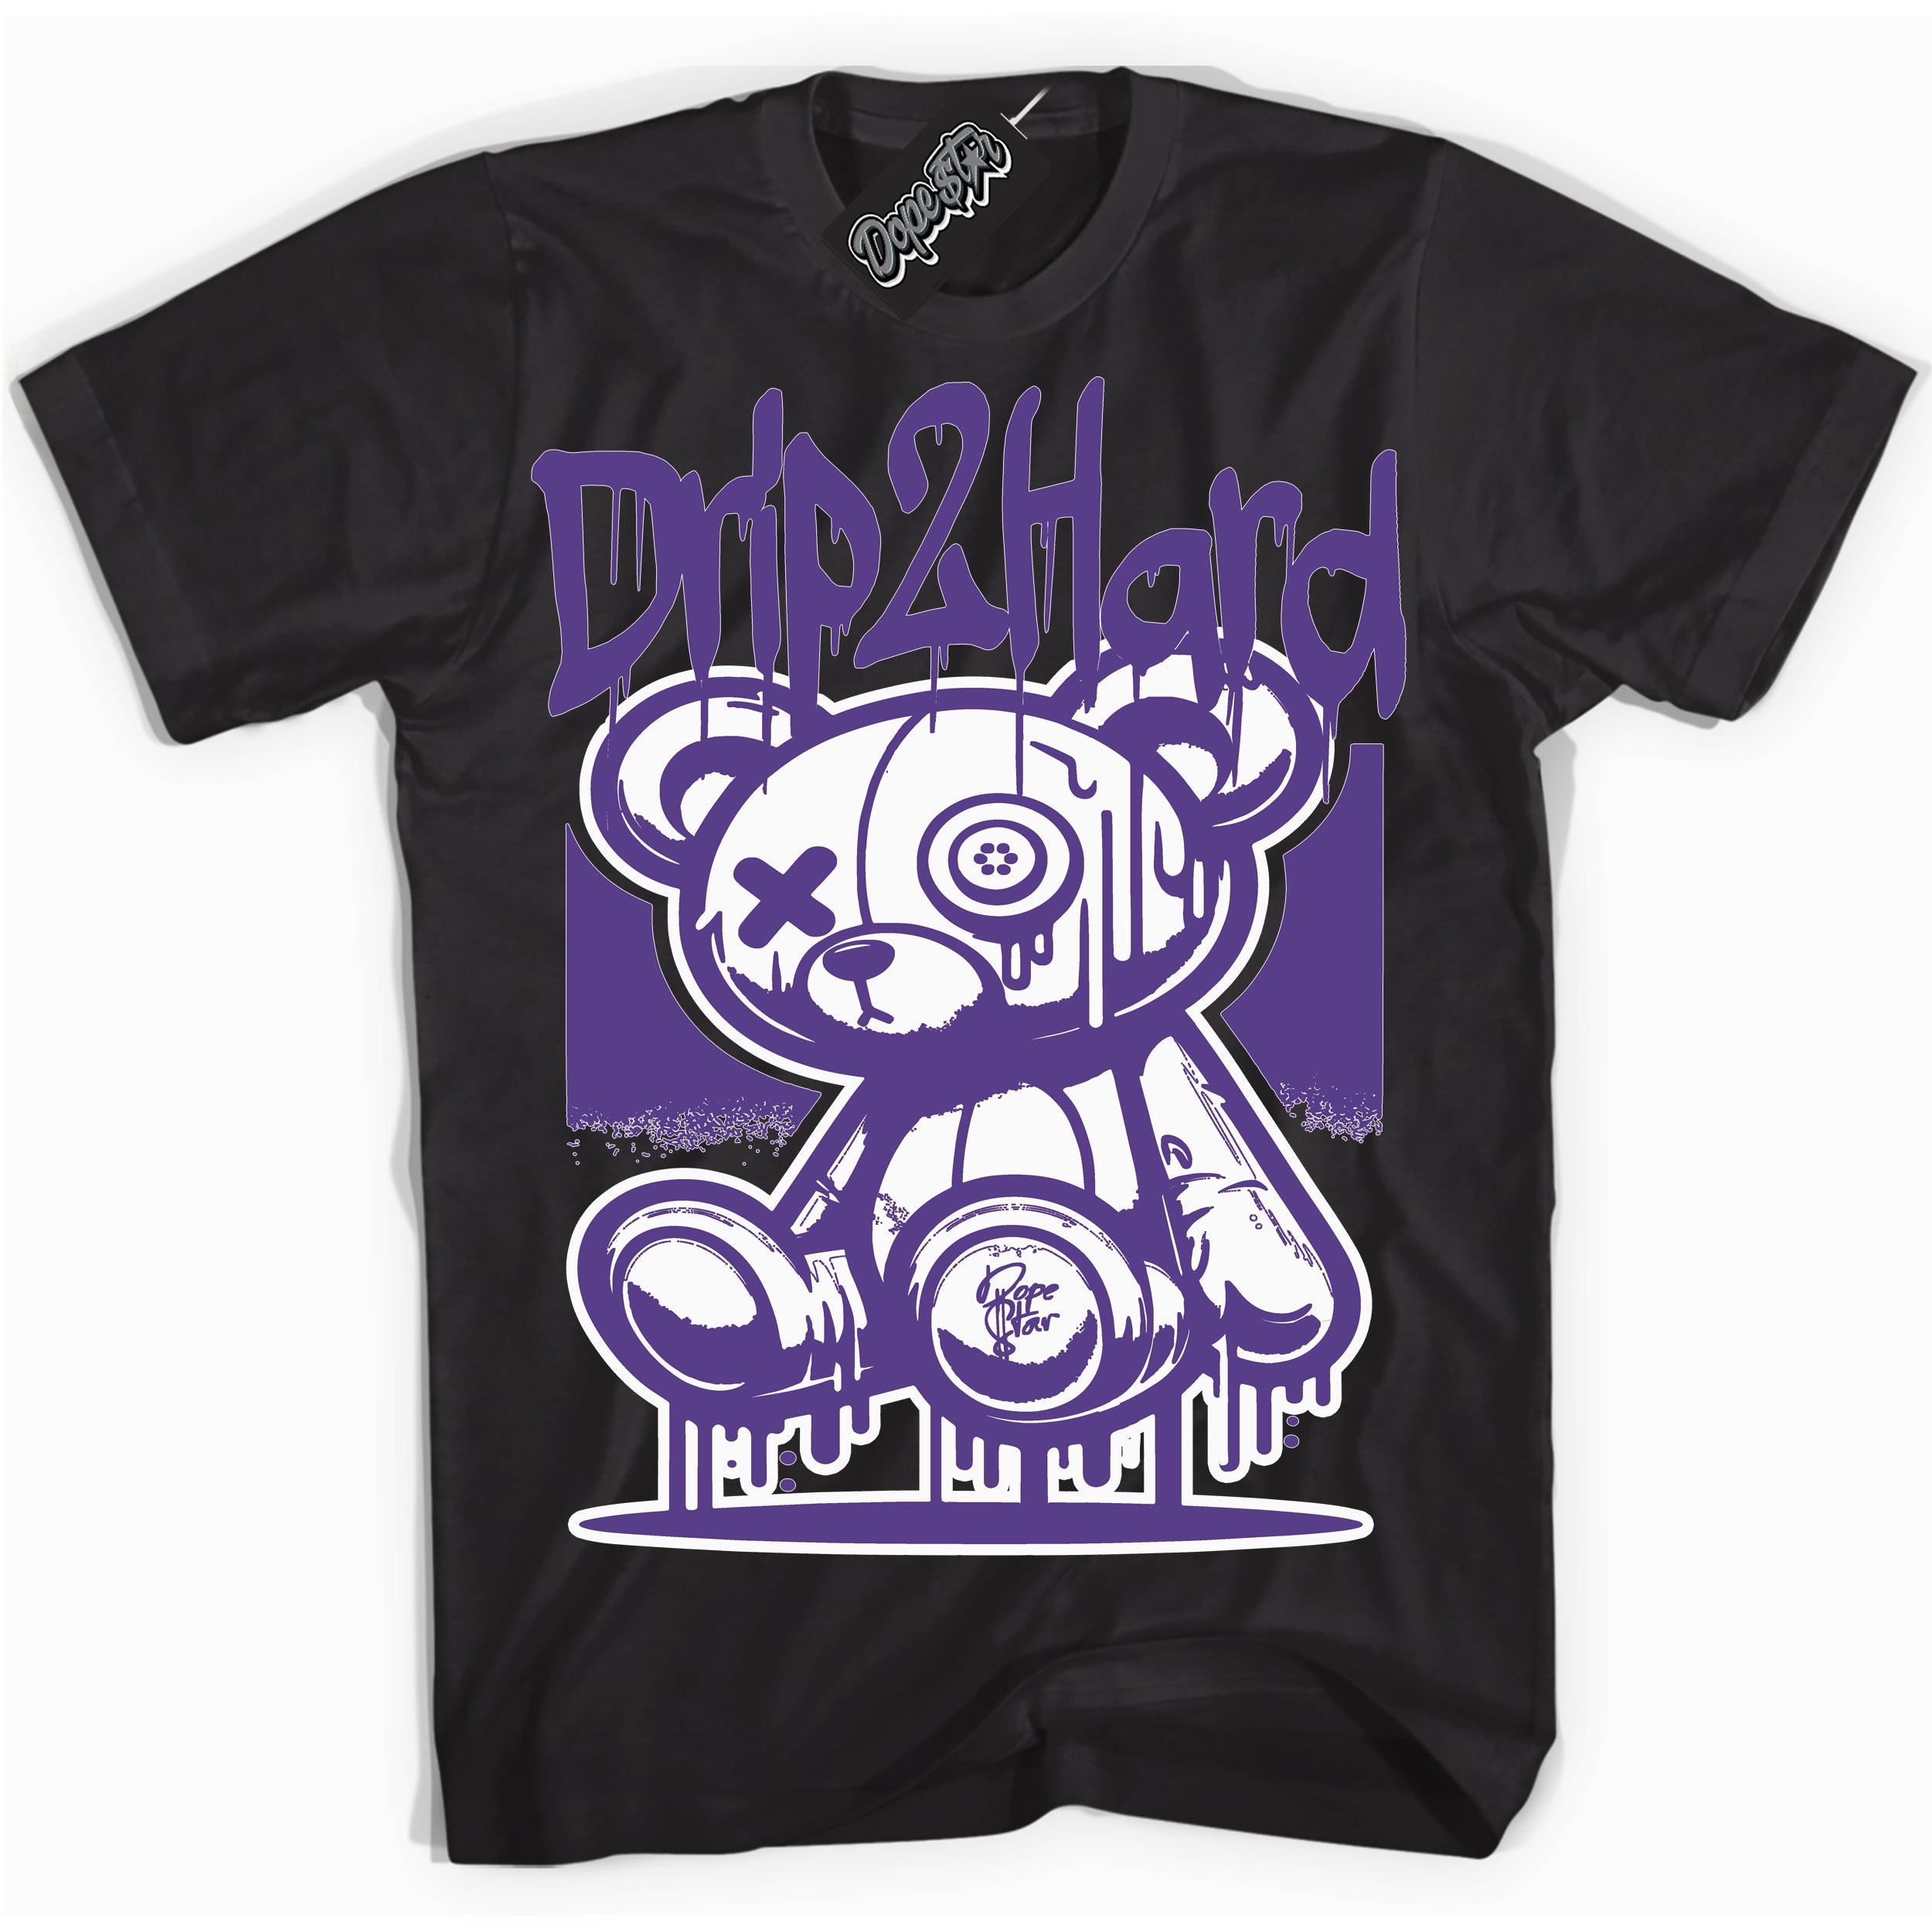 Cool Black graphic tee with “ Drip 2 Hard ” design, that perfectly matches Kobe Protro Court Purple 8s